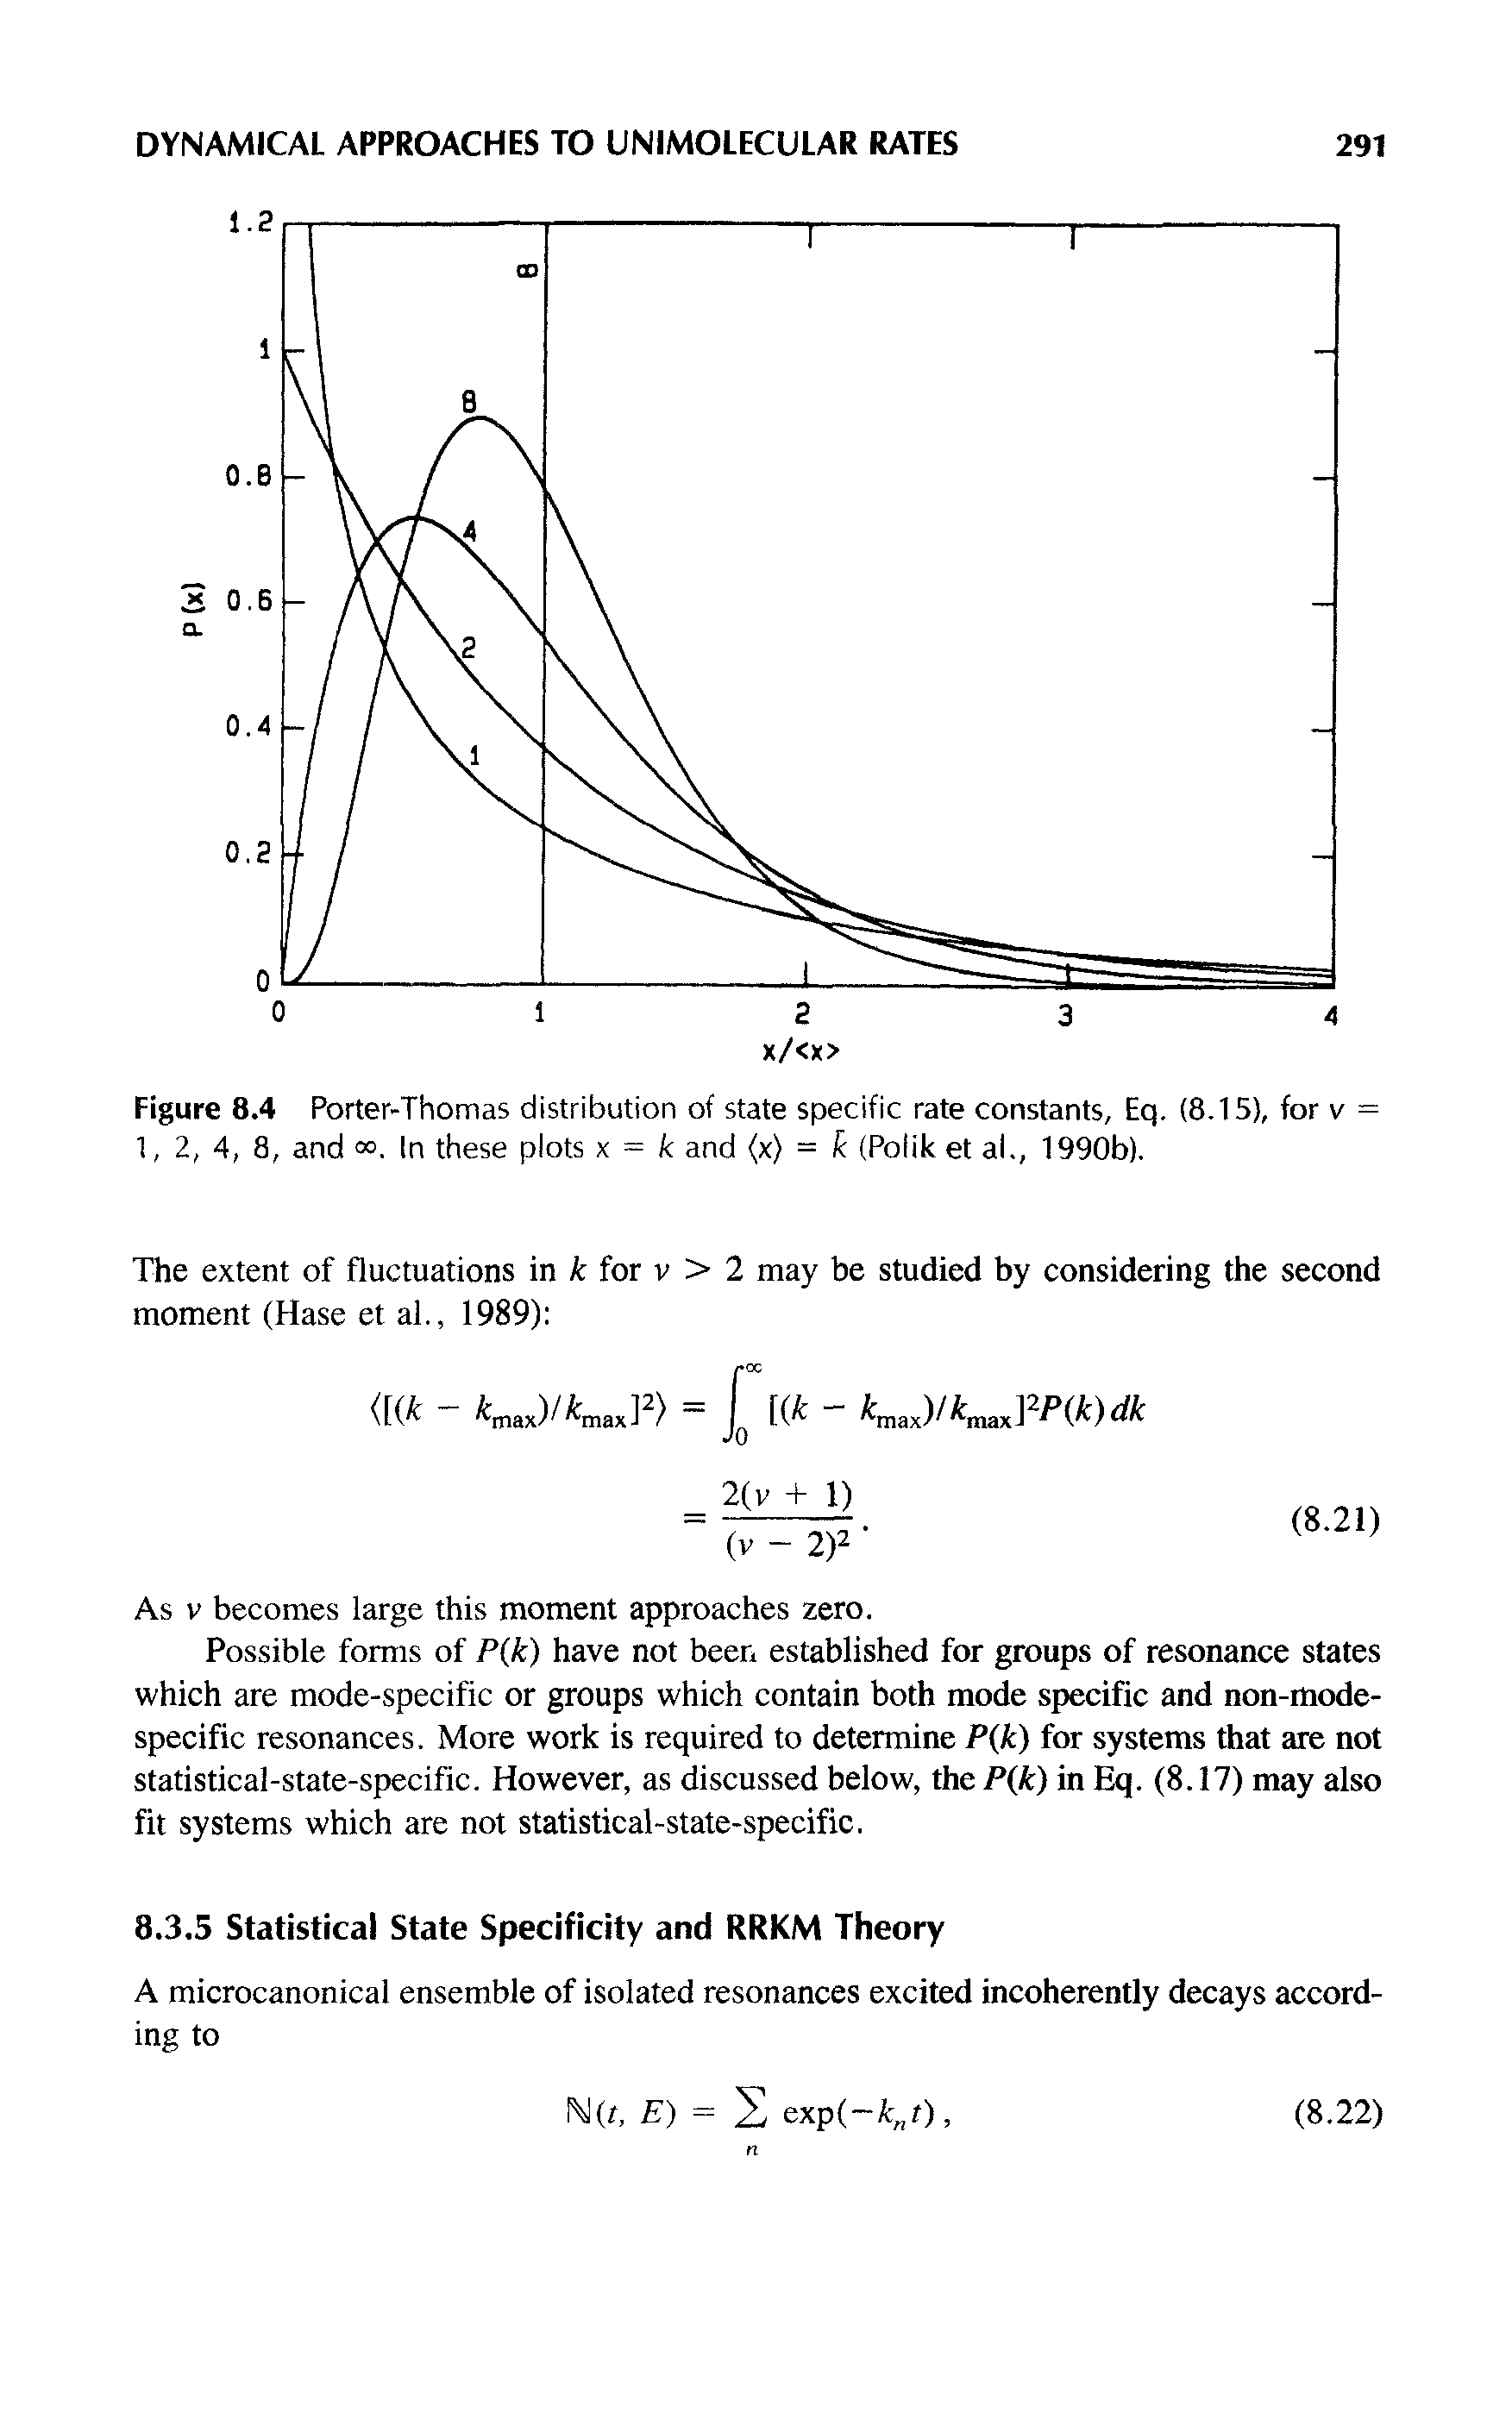 Figure 8.4 Porter-Thomas distribution of state specific rate constants, Eq. (8.15), for v 1, 2,4, 8, and In these plots x = k and (x) = k (Polik et al, 1990b).